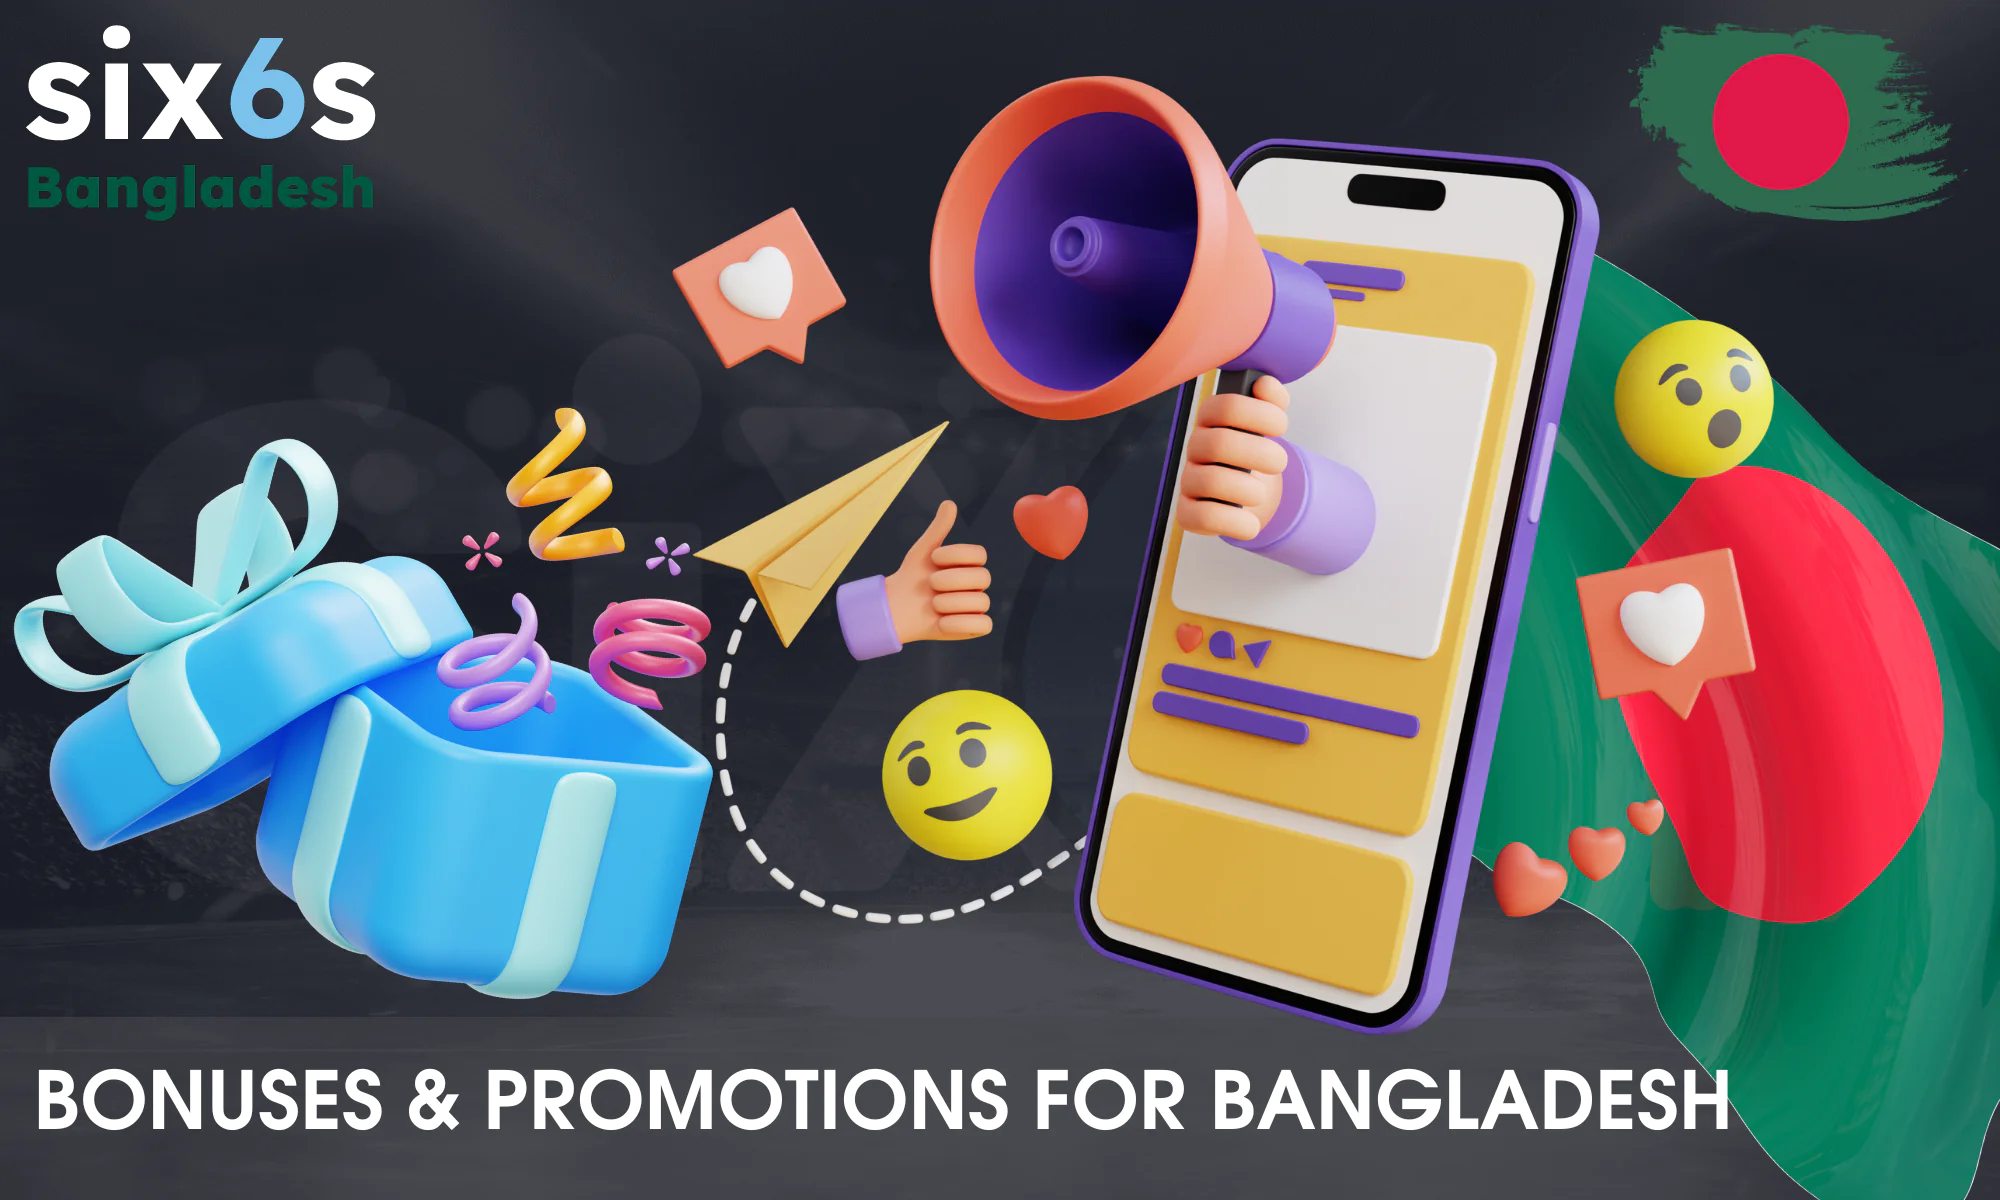 Exclusive bonuses and promotions from Six6s for players from Bangladesh